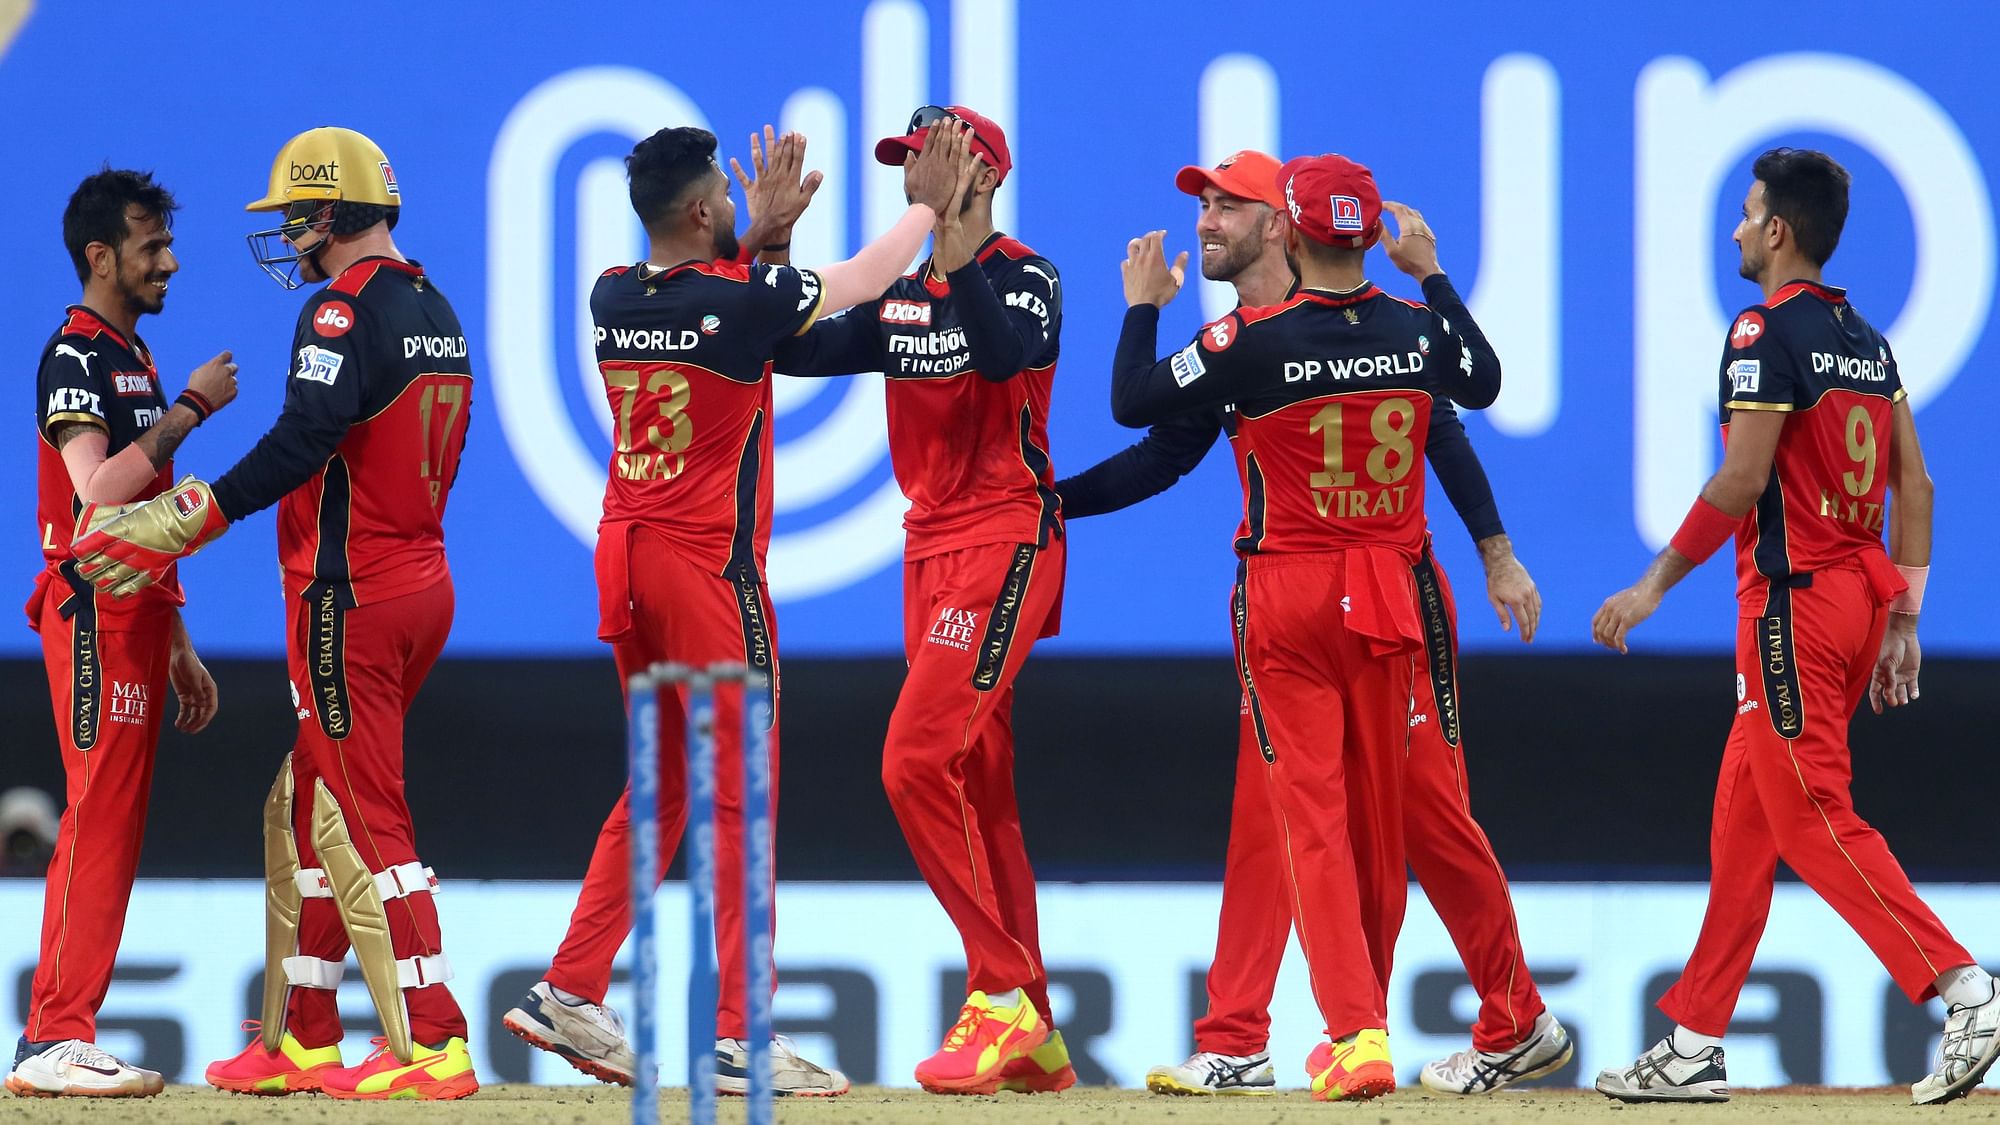 Royal Challengers Bangalore have started IPL 2021 with three wins on the bounce.&nbsp;